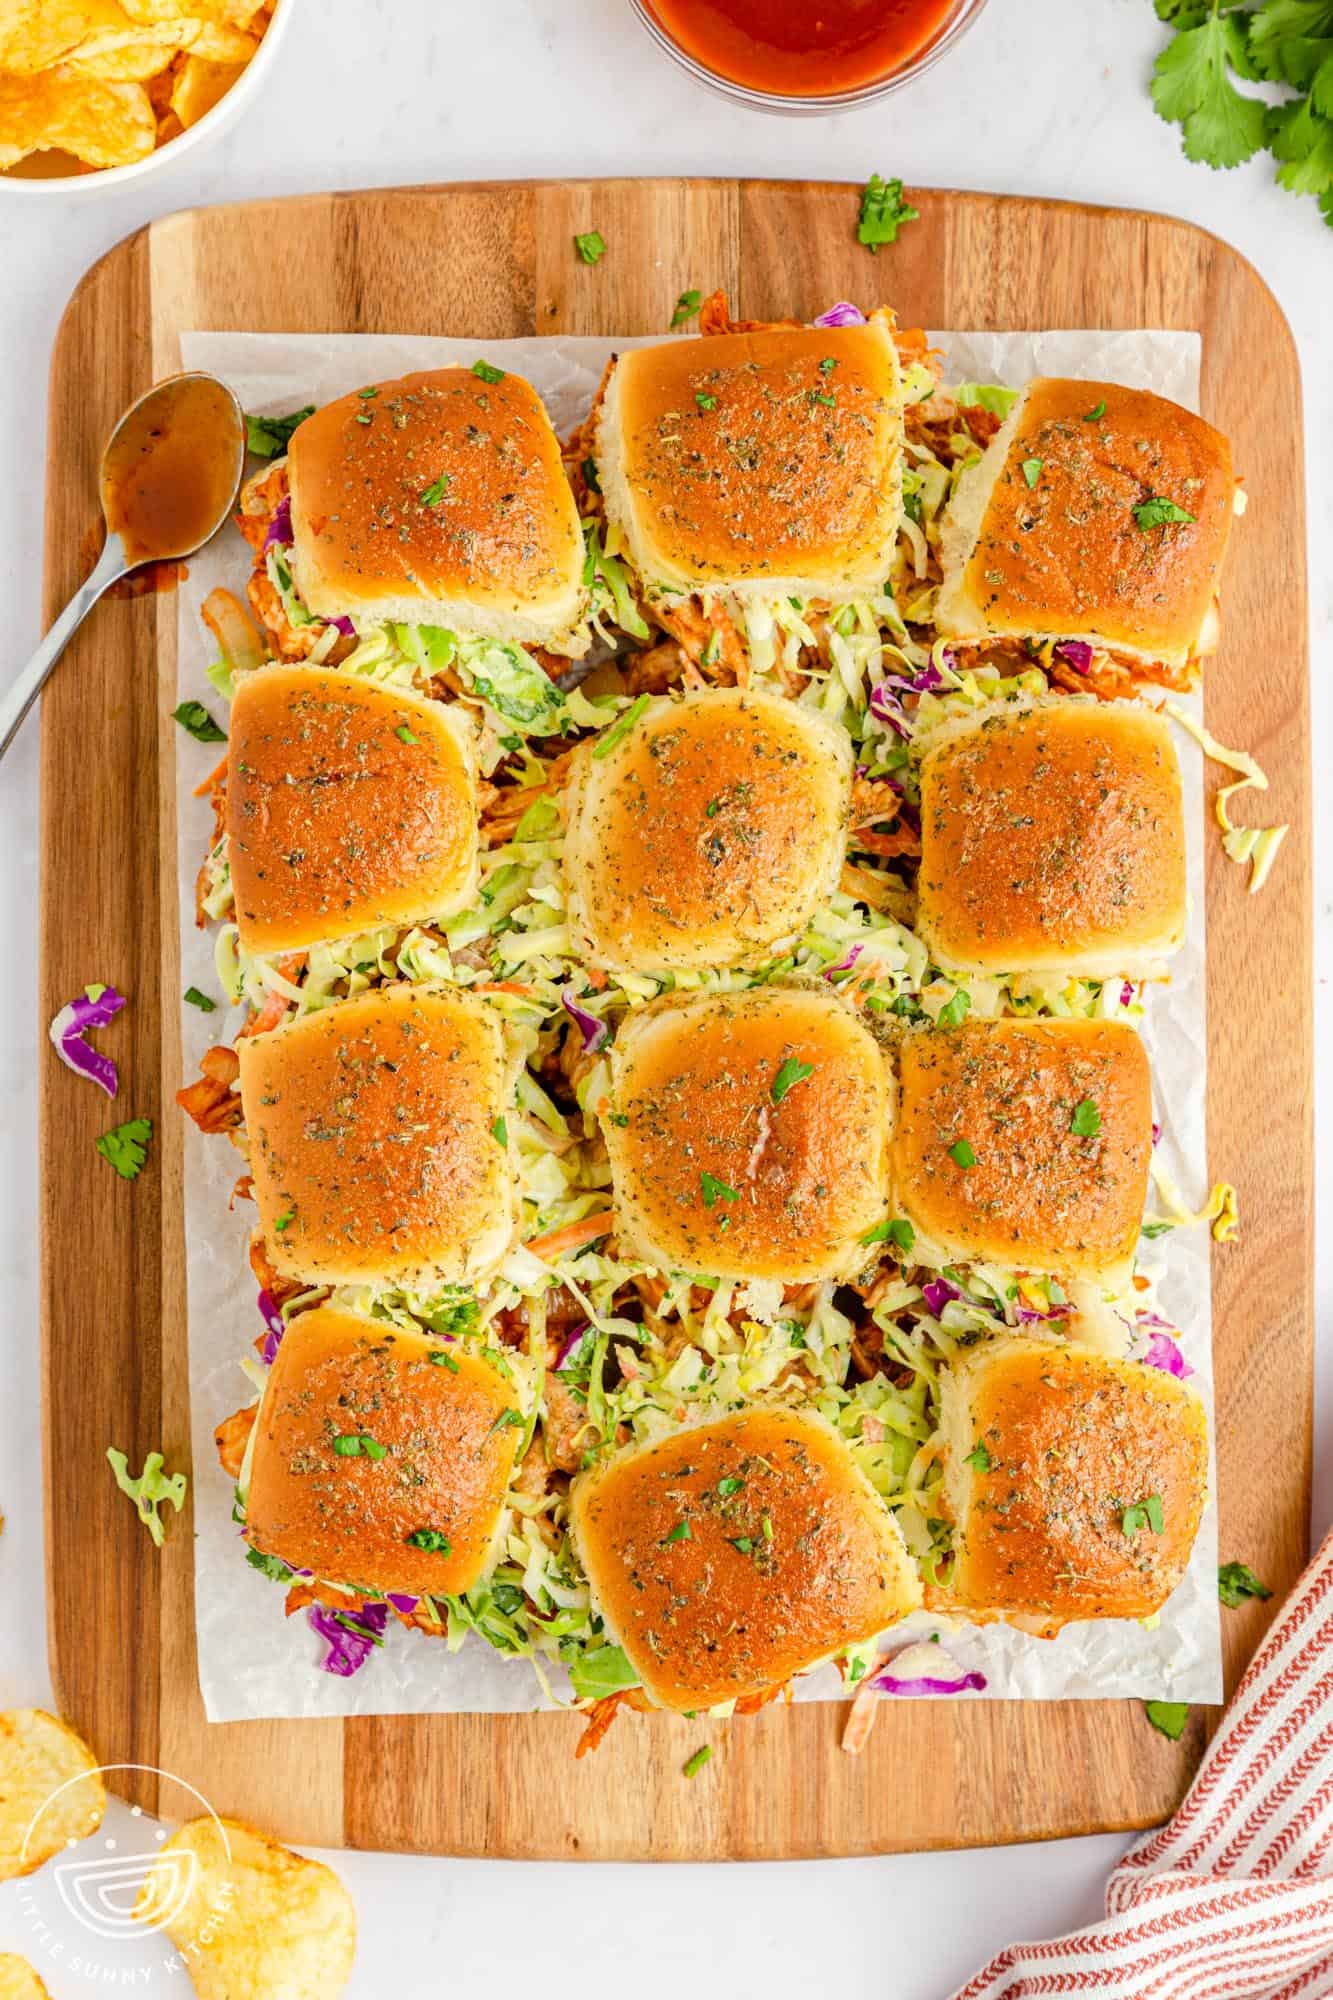 a wooden cutting board holding 12 chicken sliders on hawaiian rolls topped with herbs.